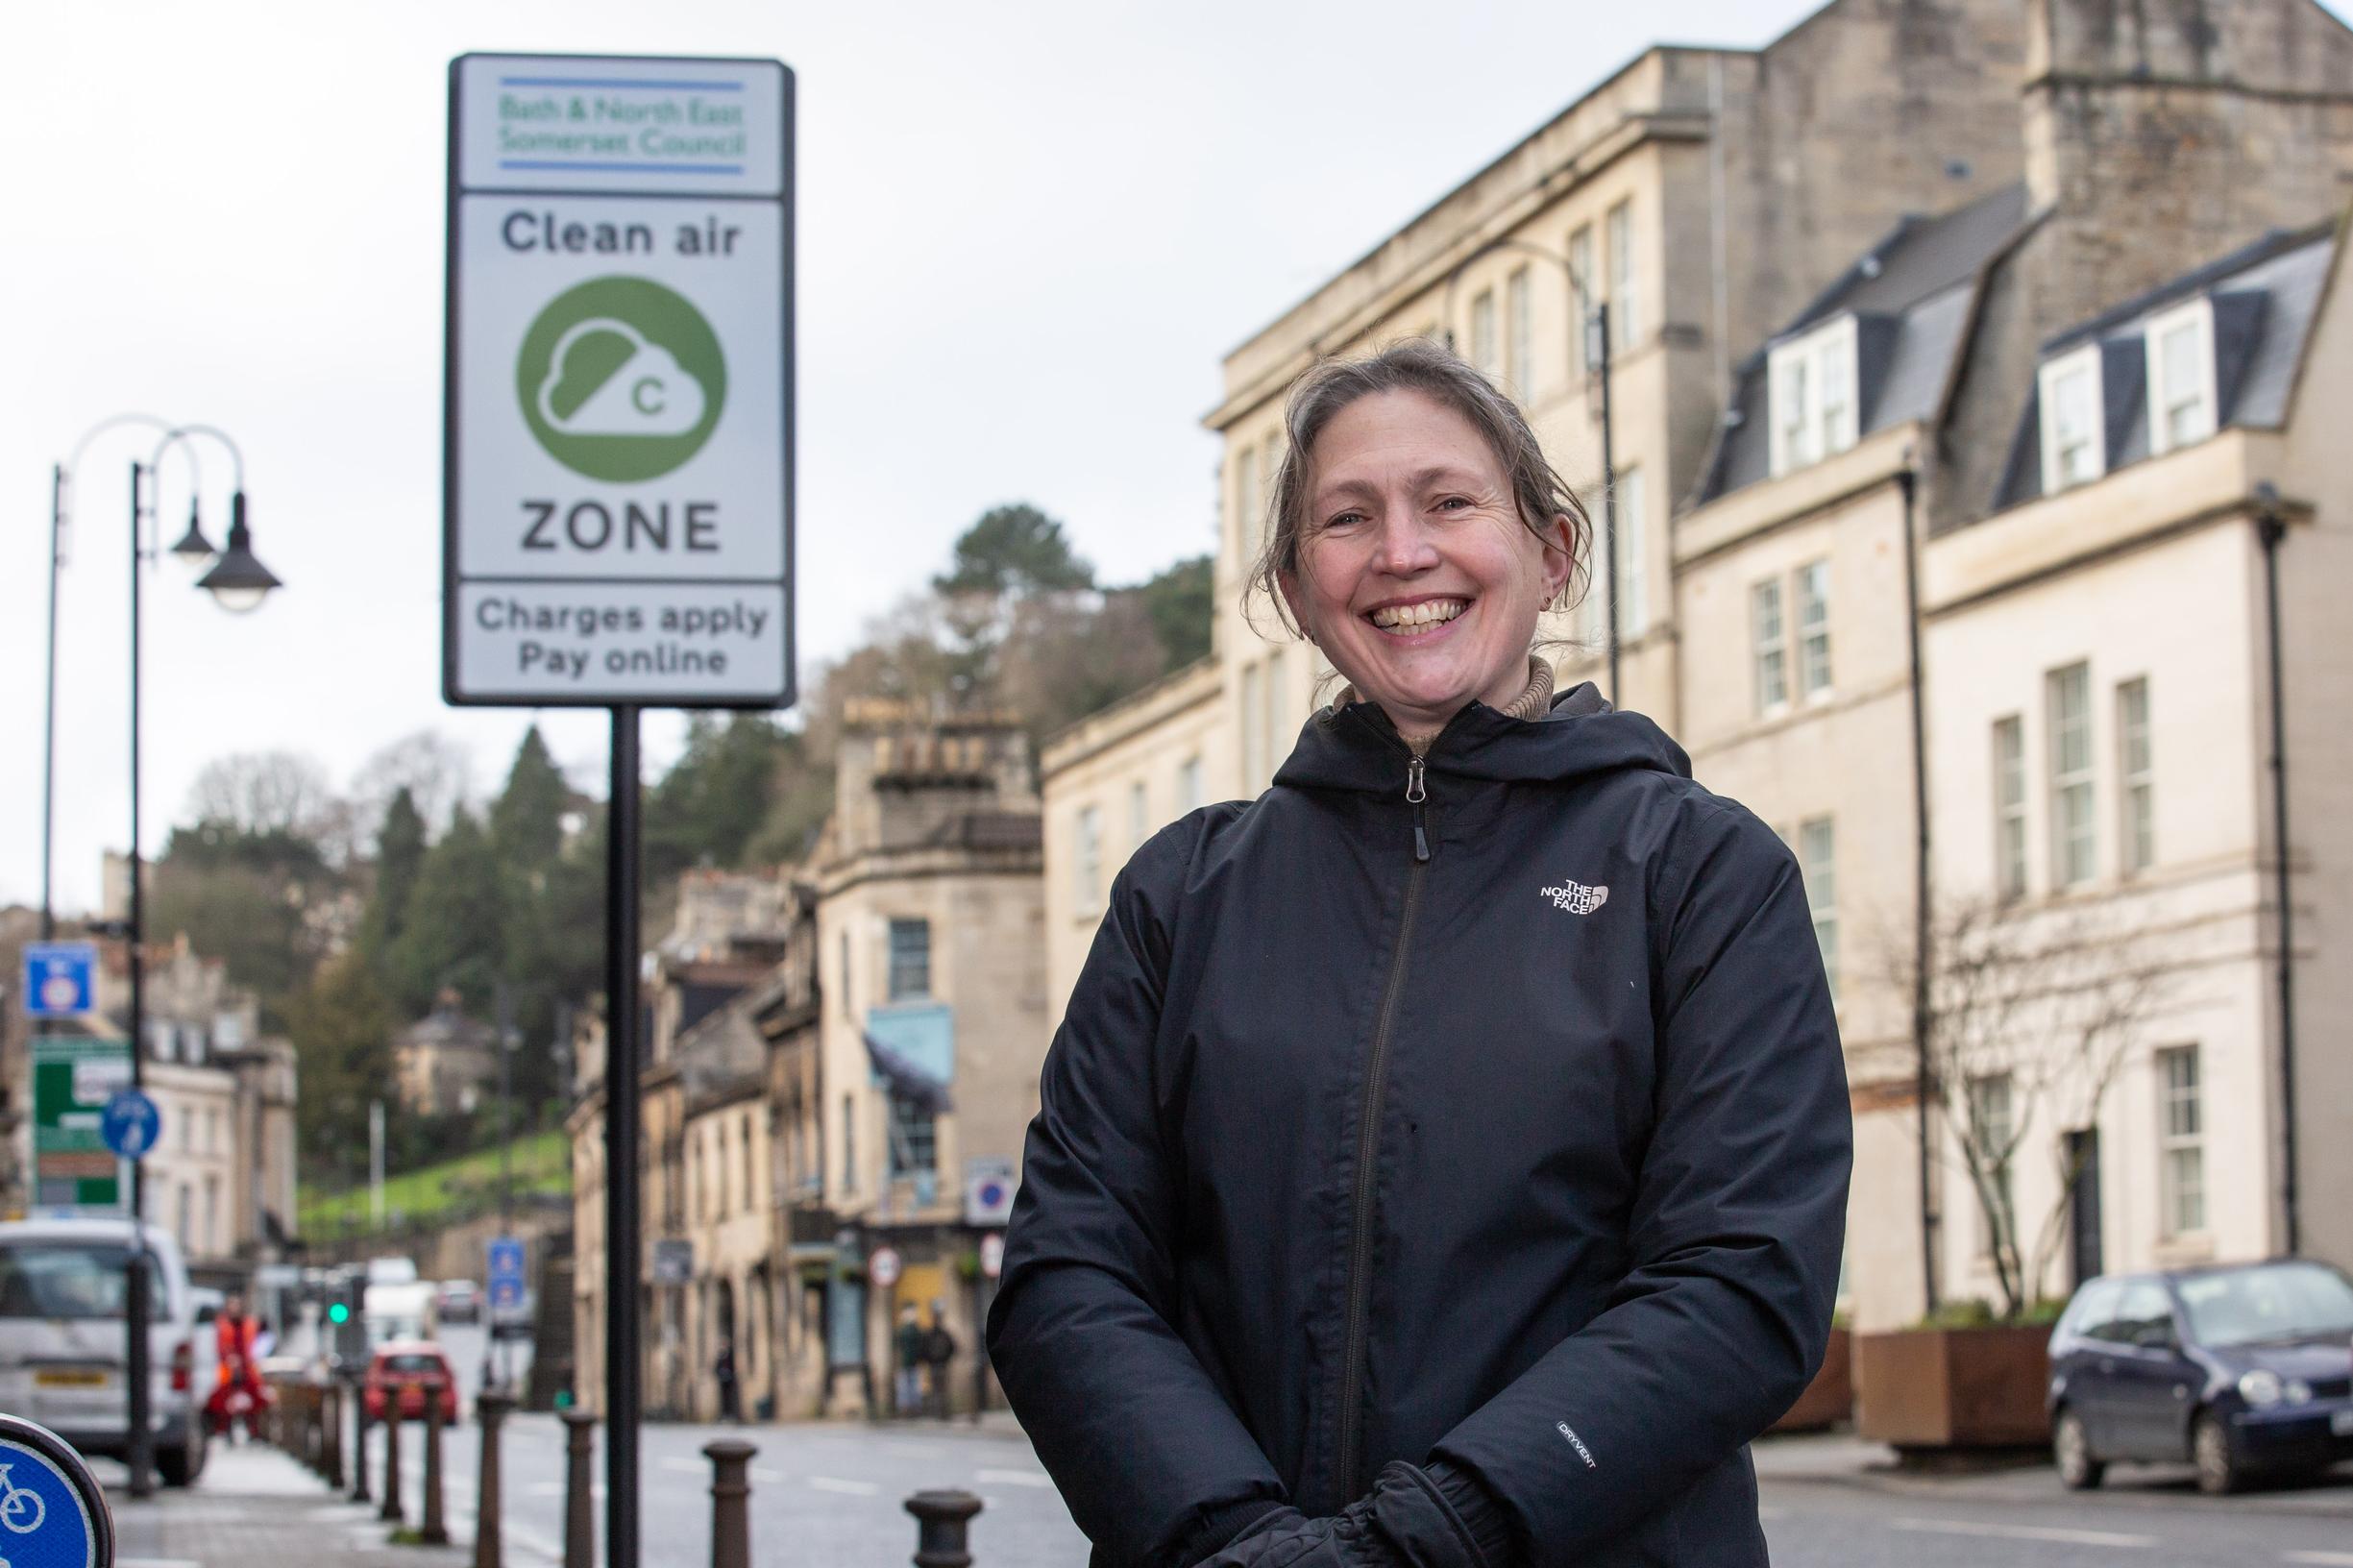 Councillor Sarah Warren, Bath & North East Somerset’s cabinet member for climate emergency and neighbourhood services